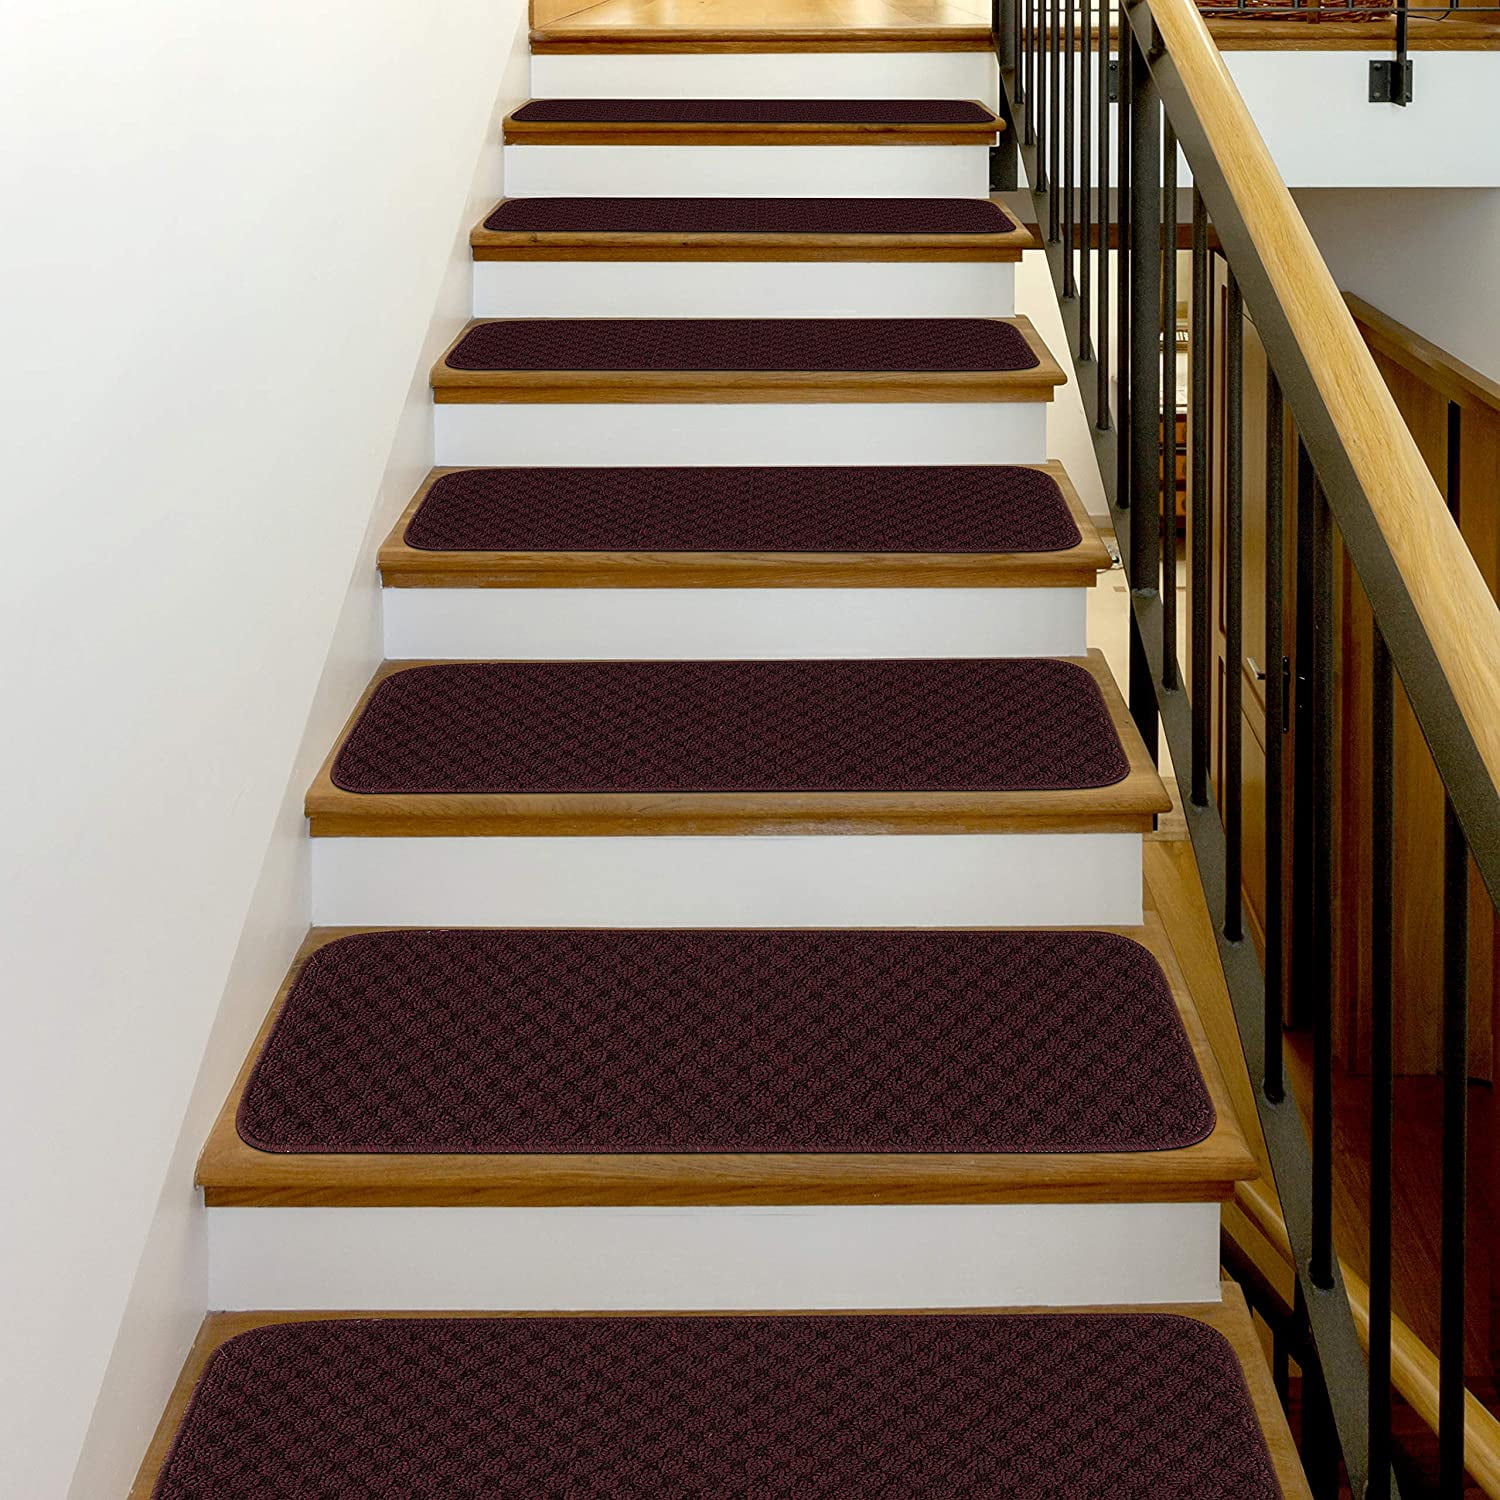 Details about   Famibay Set of 13 Rubber Backing Stair Treads Carpet Indoor Outdoor Safety an... 